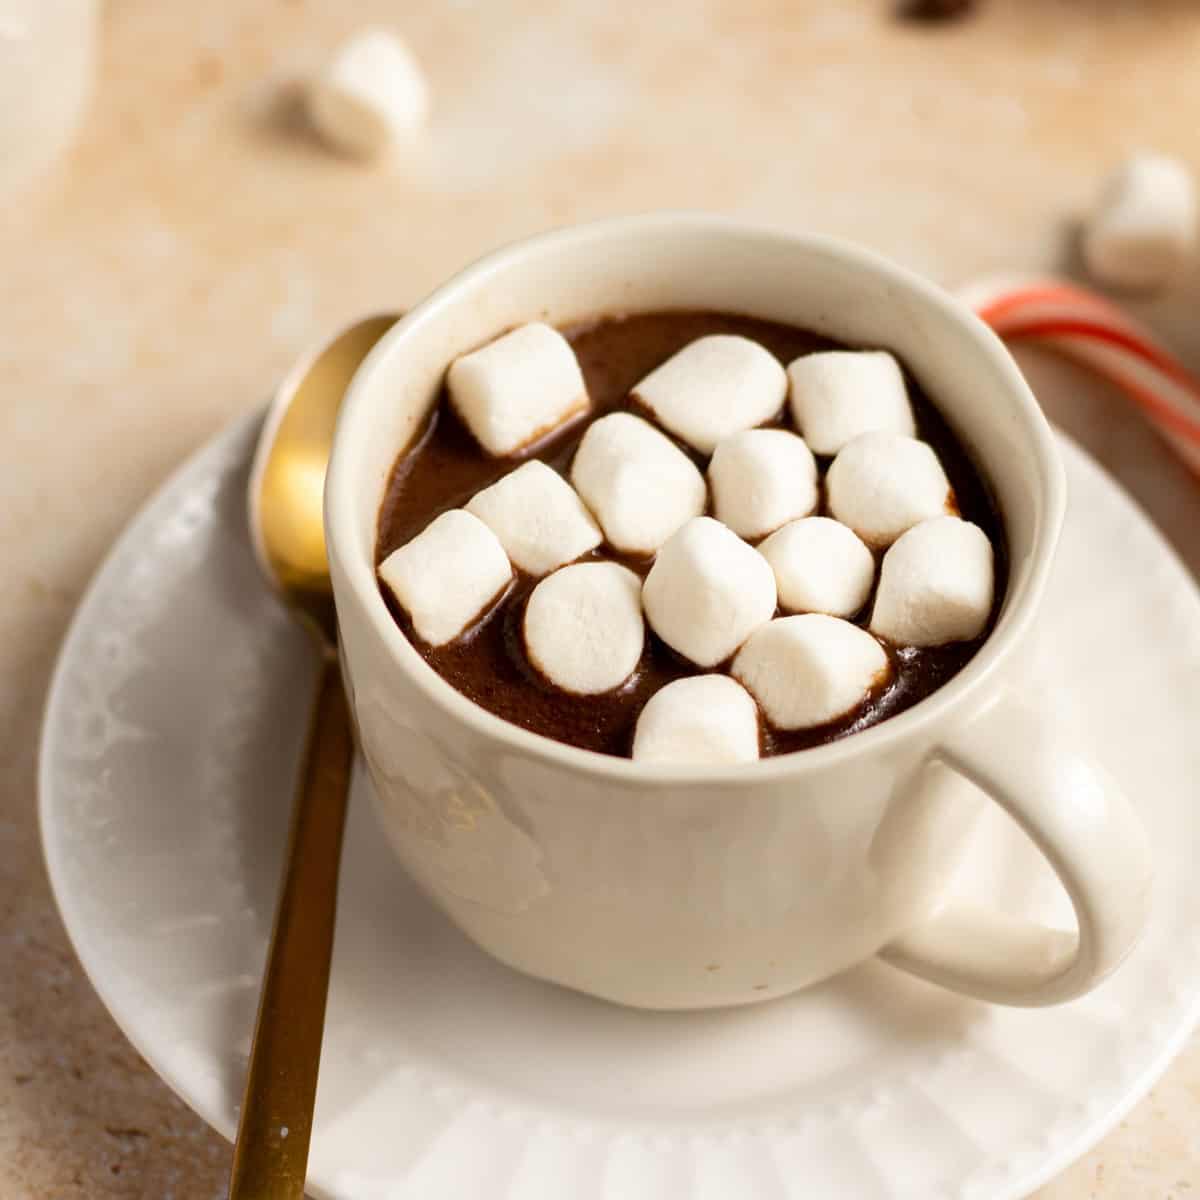 Instant Pot Hot Chocolate • Food Folks and Fun